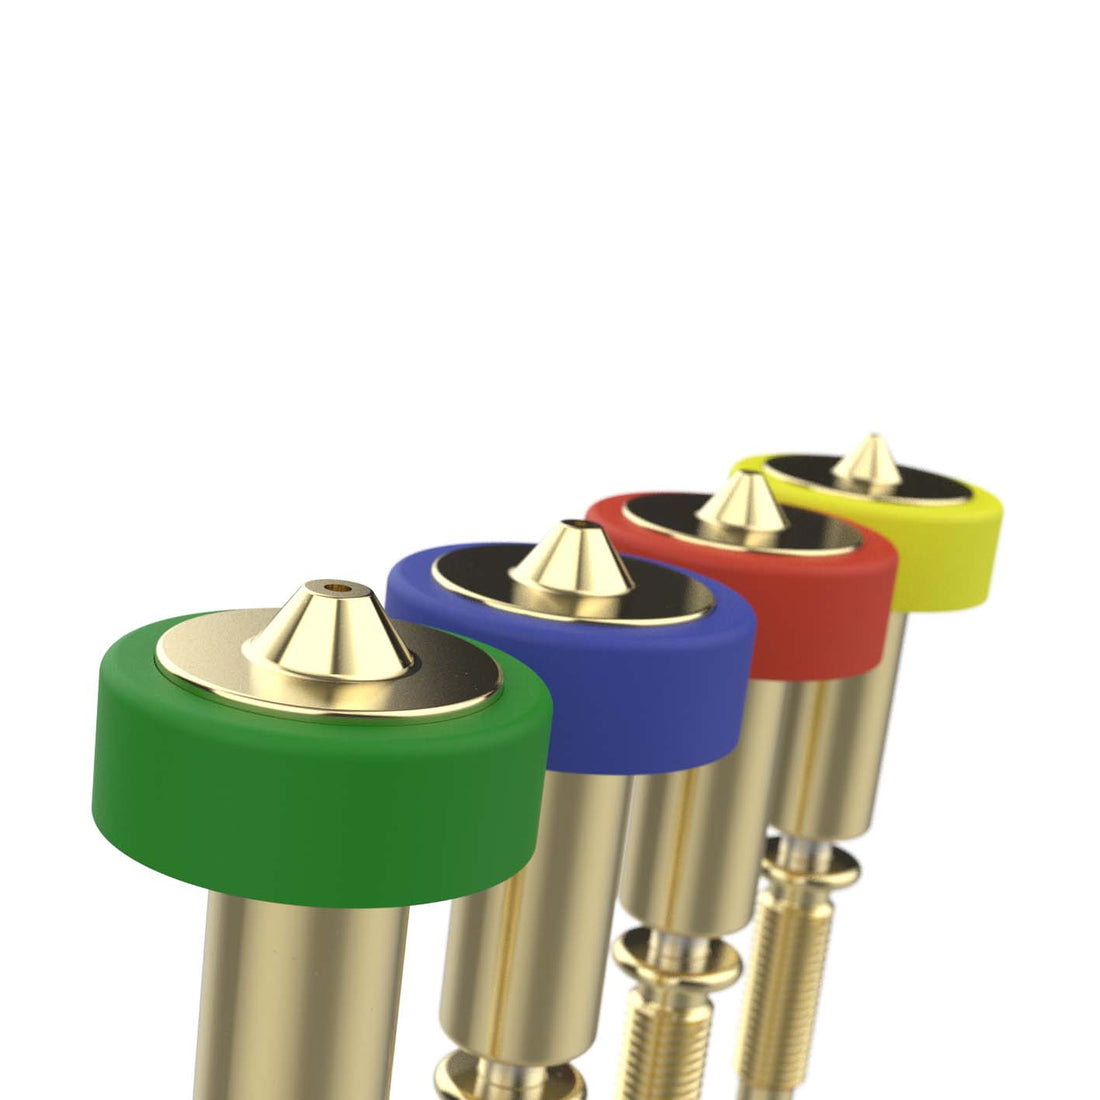 E3D's new colourful RapidChange Revo nozzles sizes 0.25 (yellow), 0.4 (red), 0.6 (blue) and 0.8 (green).